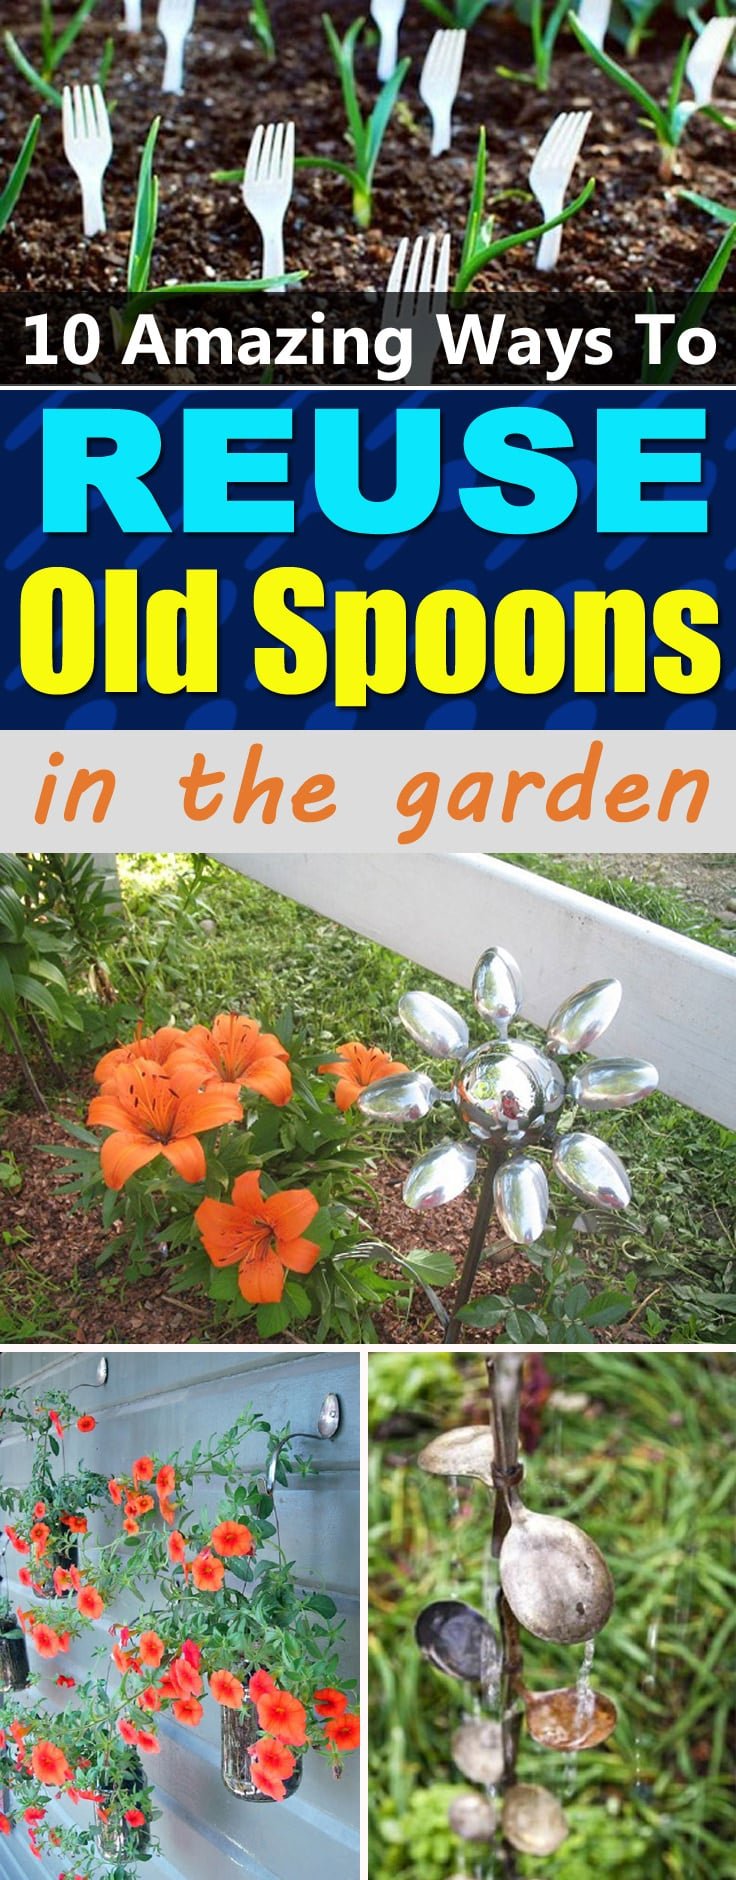 Reuse old spoons and forks in the garden following our 10 DIY Spoon Crafts and Ideas available with the tutorials!